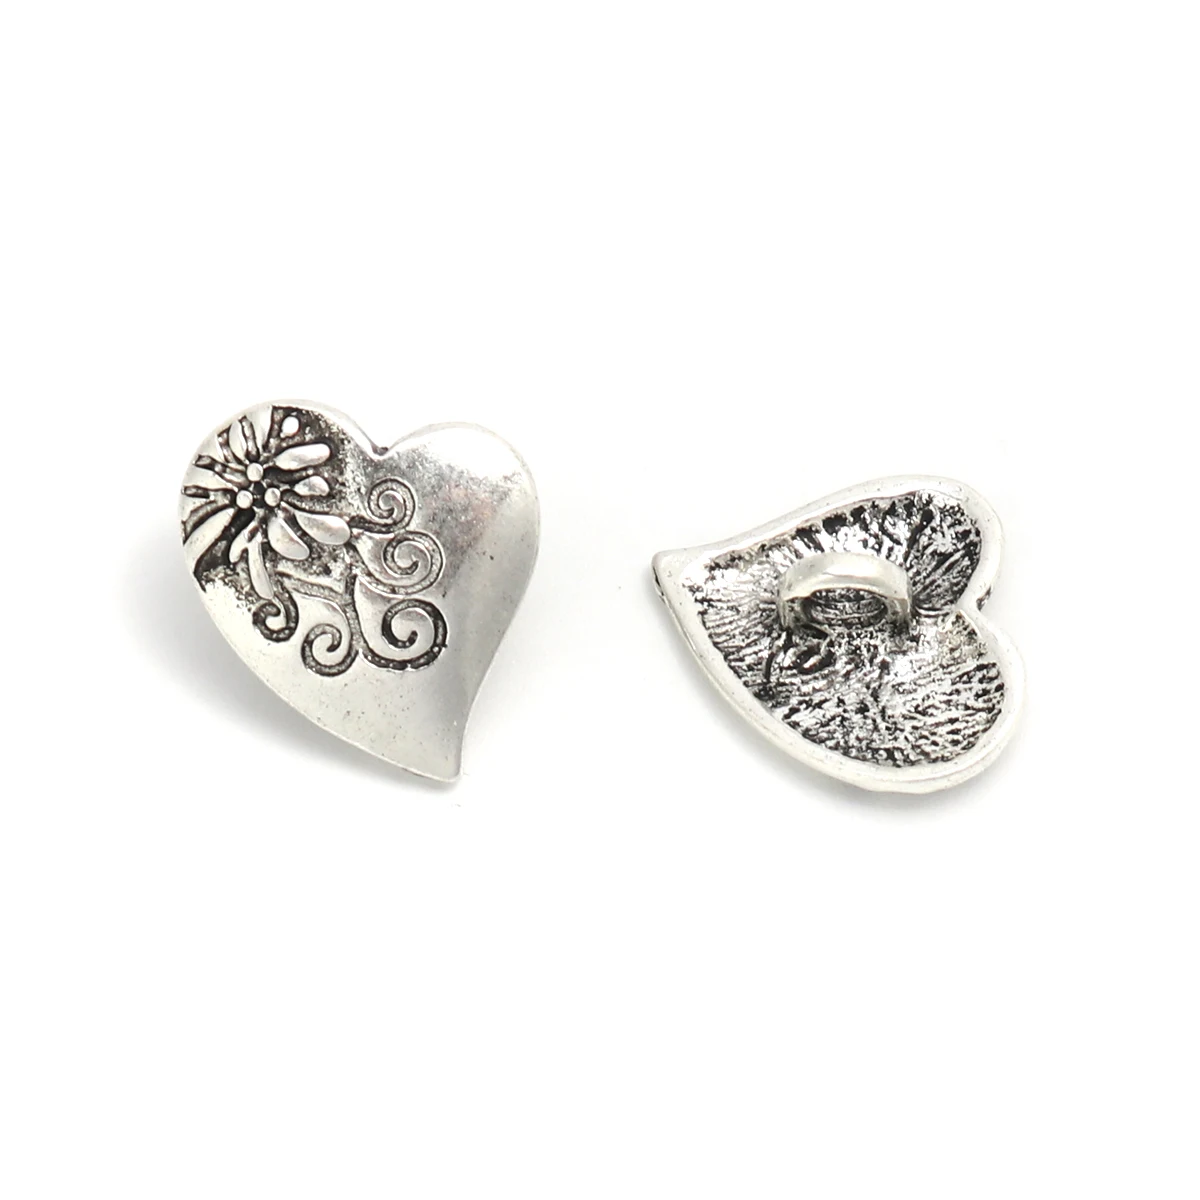 

10 PCs Zinc Based Alloy Flower Carved Heart Metal Sewing Shank Buttons Antique Silver Color 20mm x 17mm Clothing Accessories